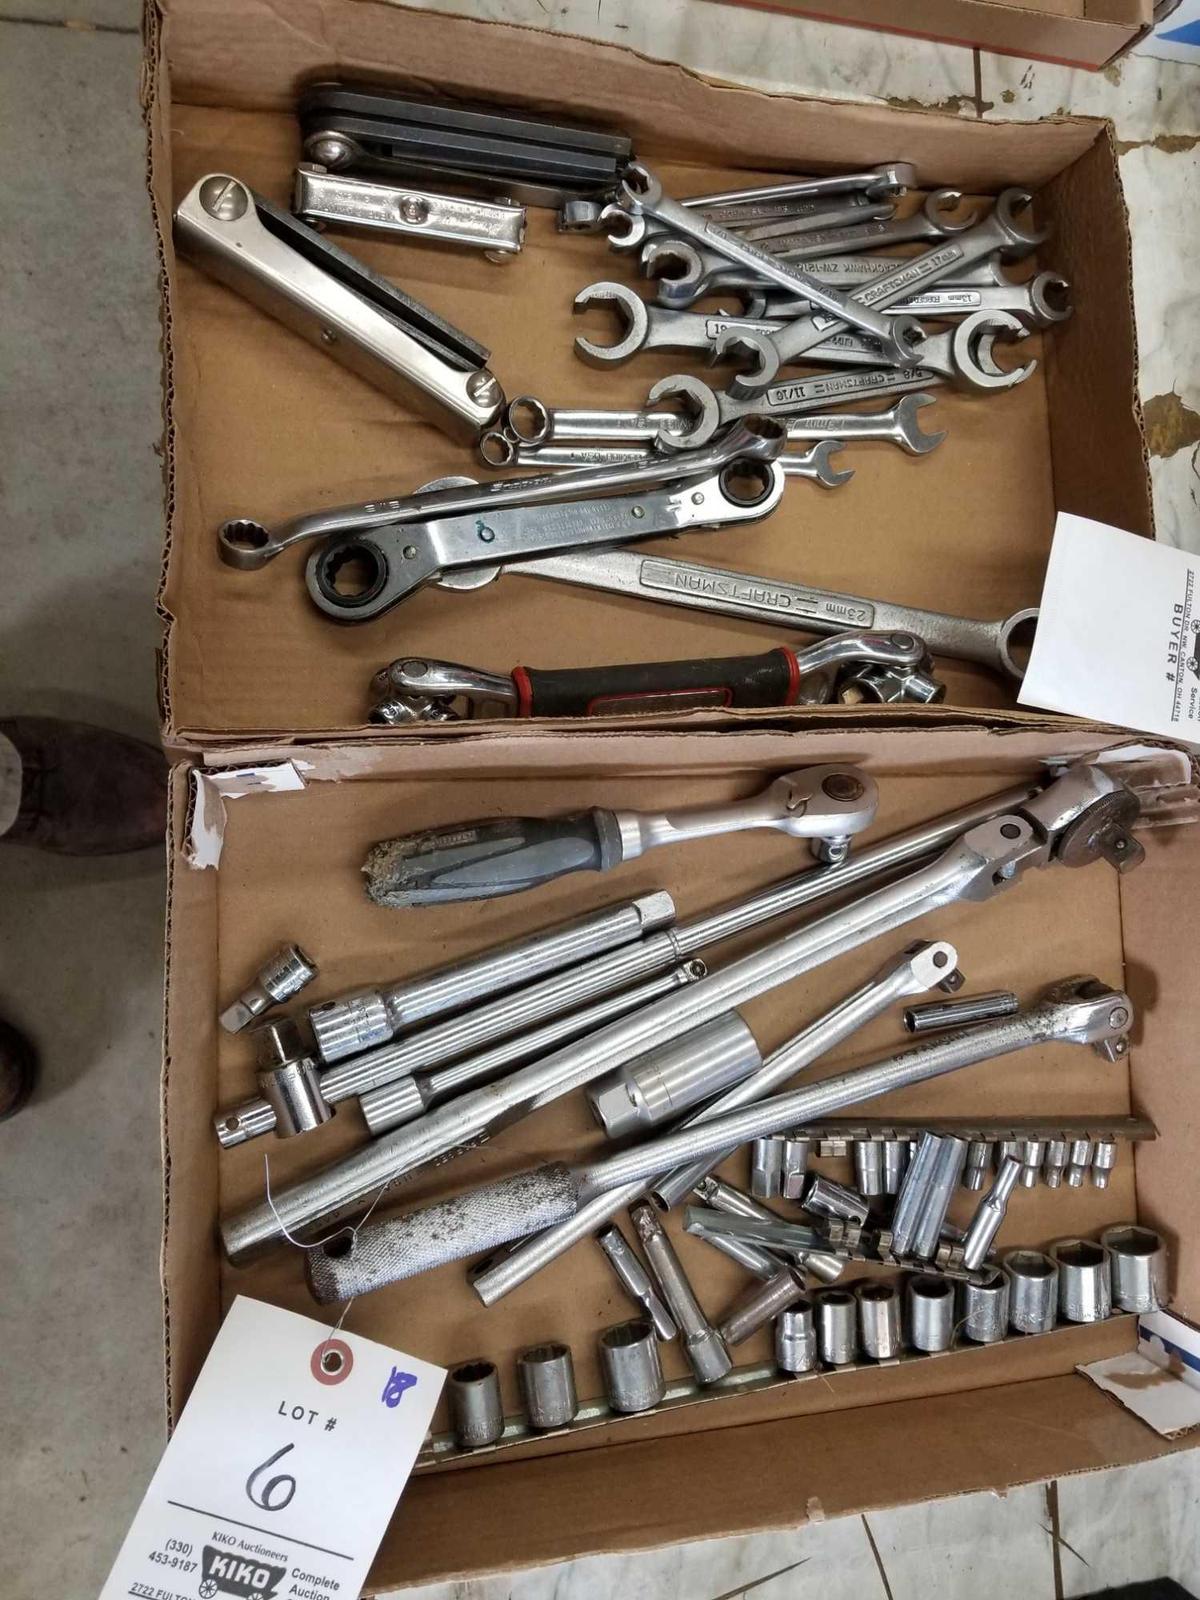 2 boxes wrenches and sockets